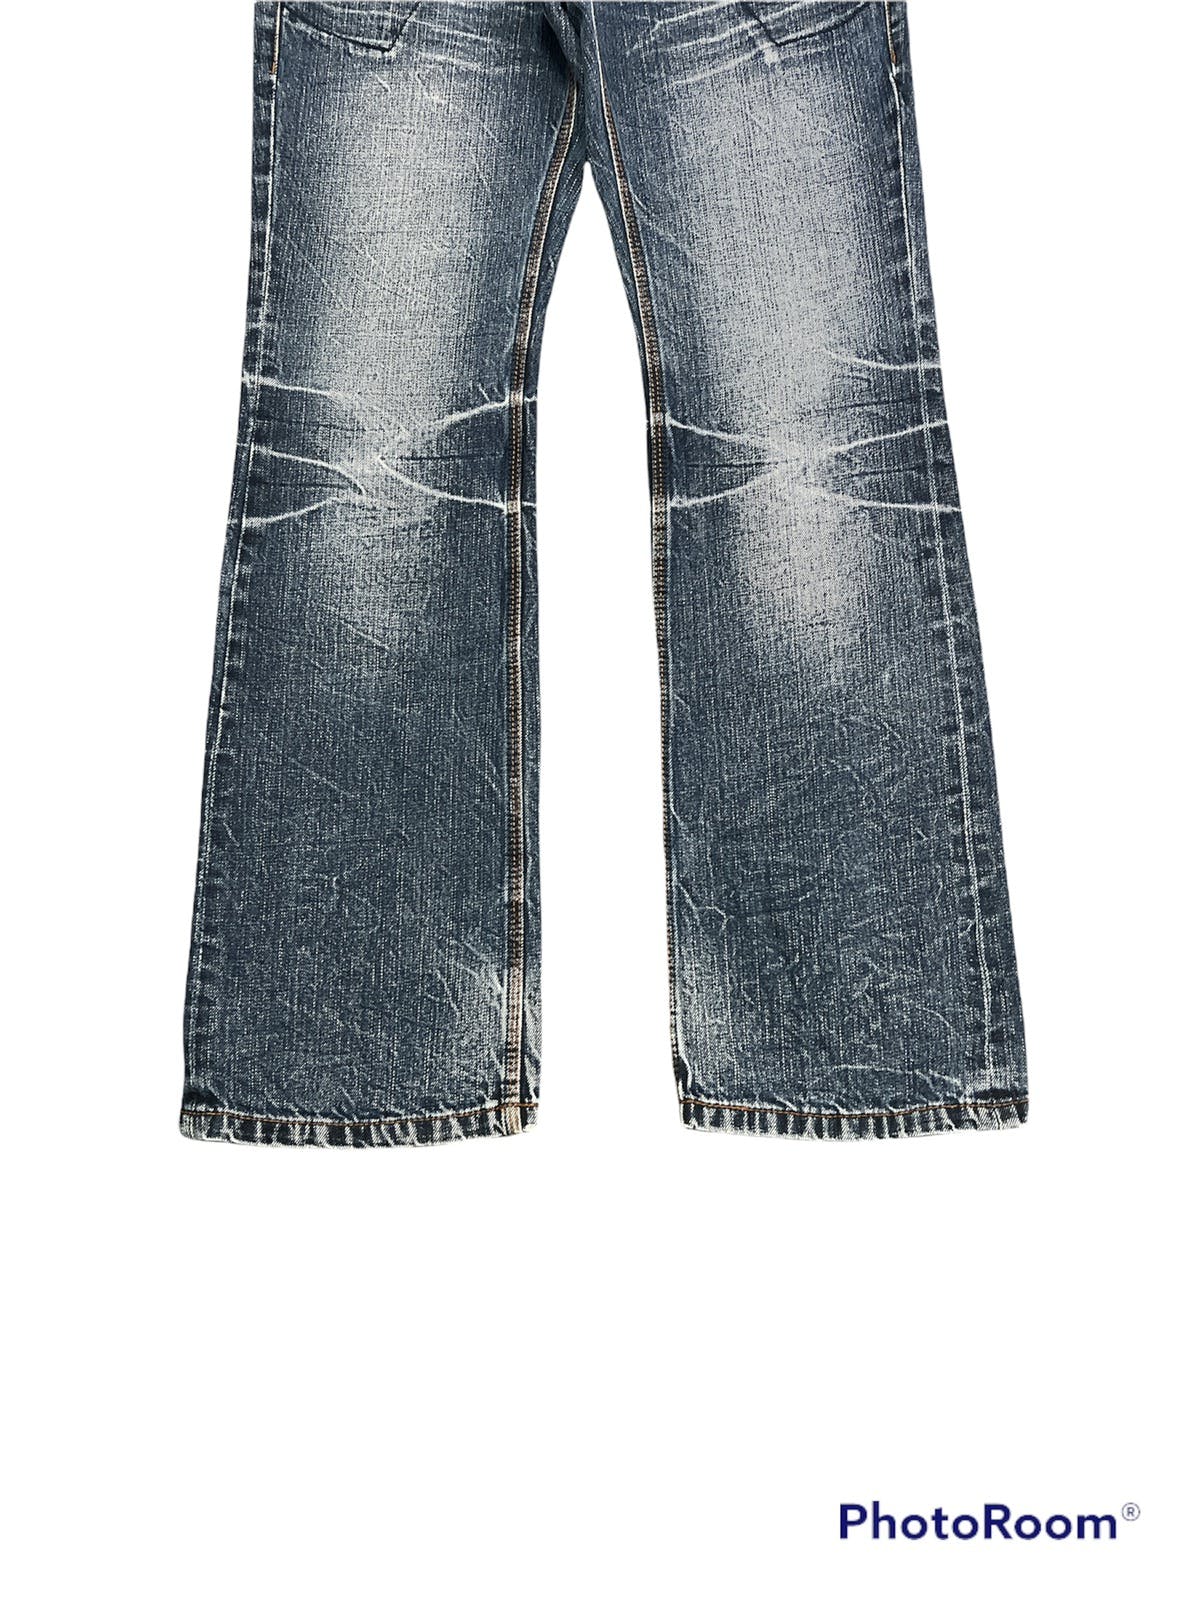 Distressed Japan Blue Flare by Nicole Club For Men Denim - 4